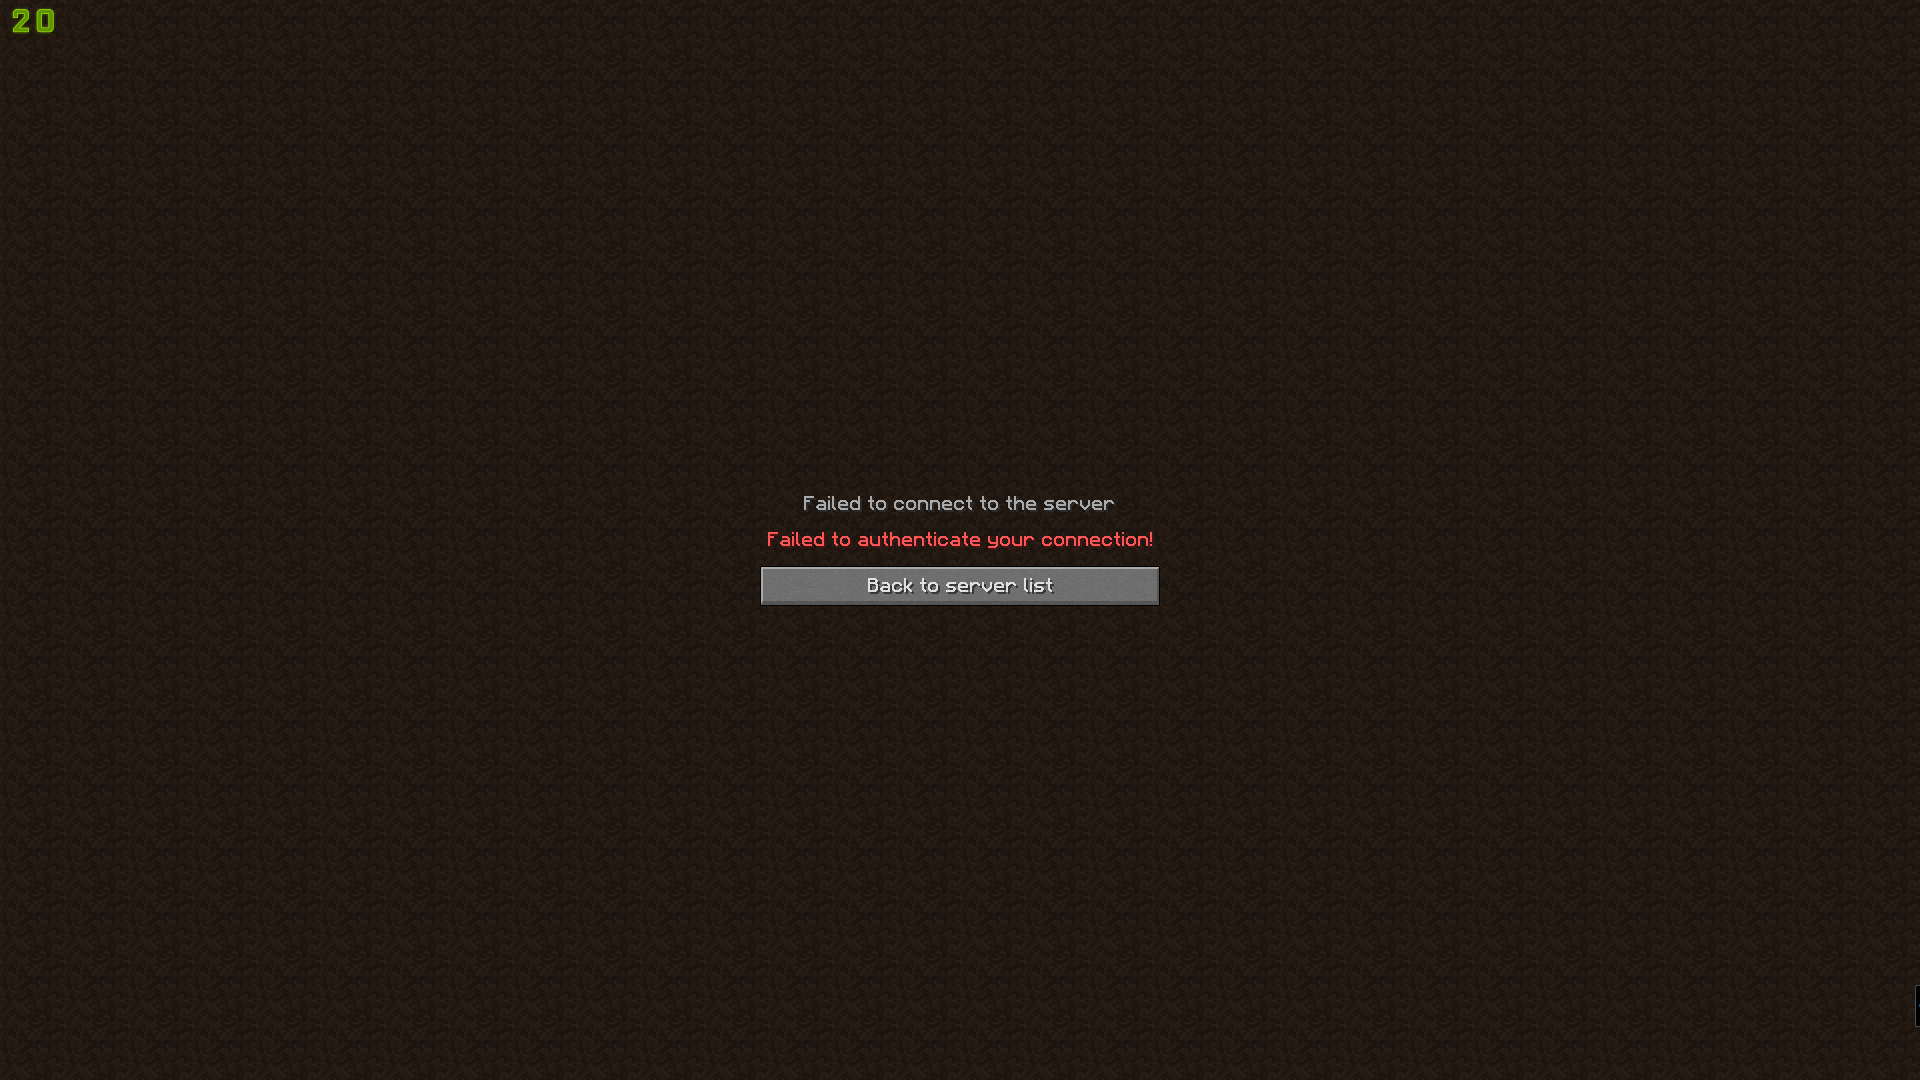 minecraft launcher (could not connect to server)